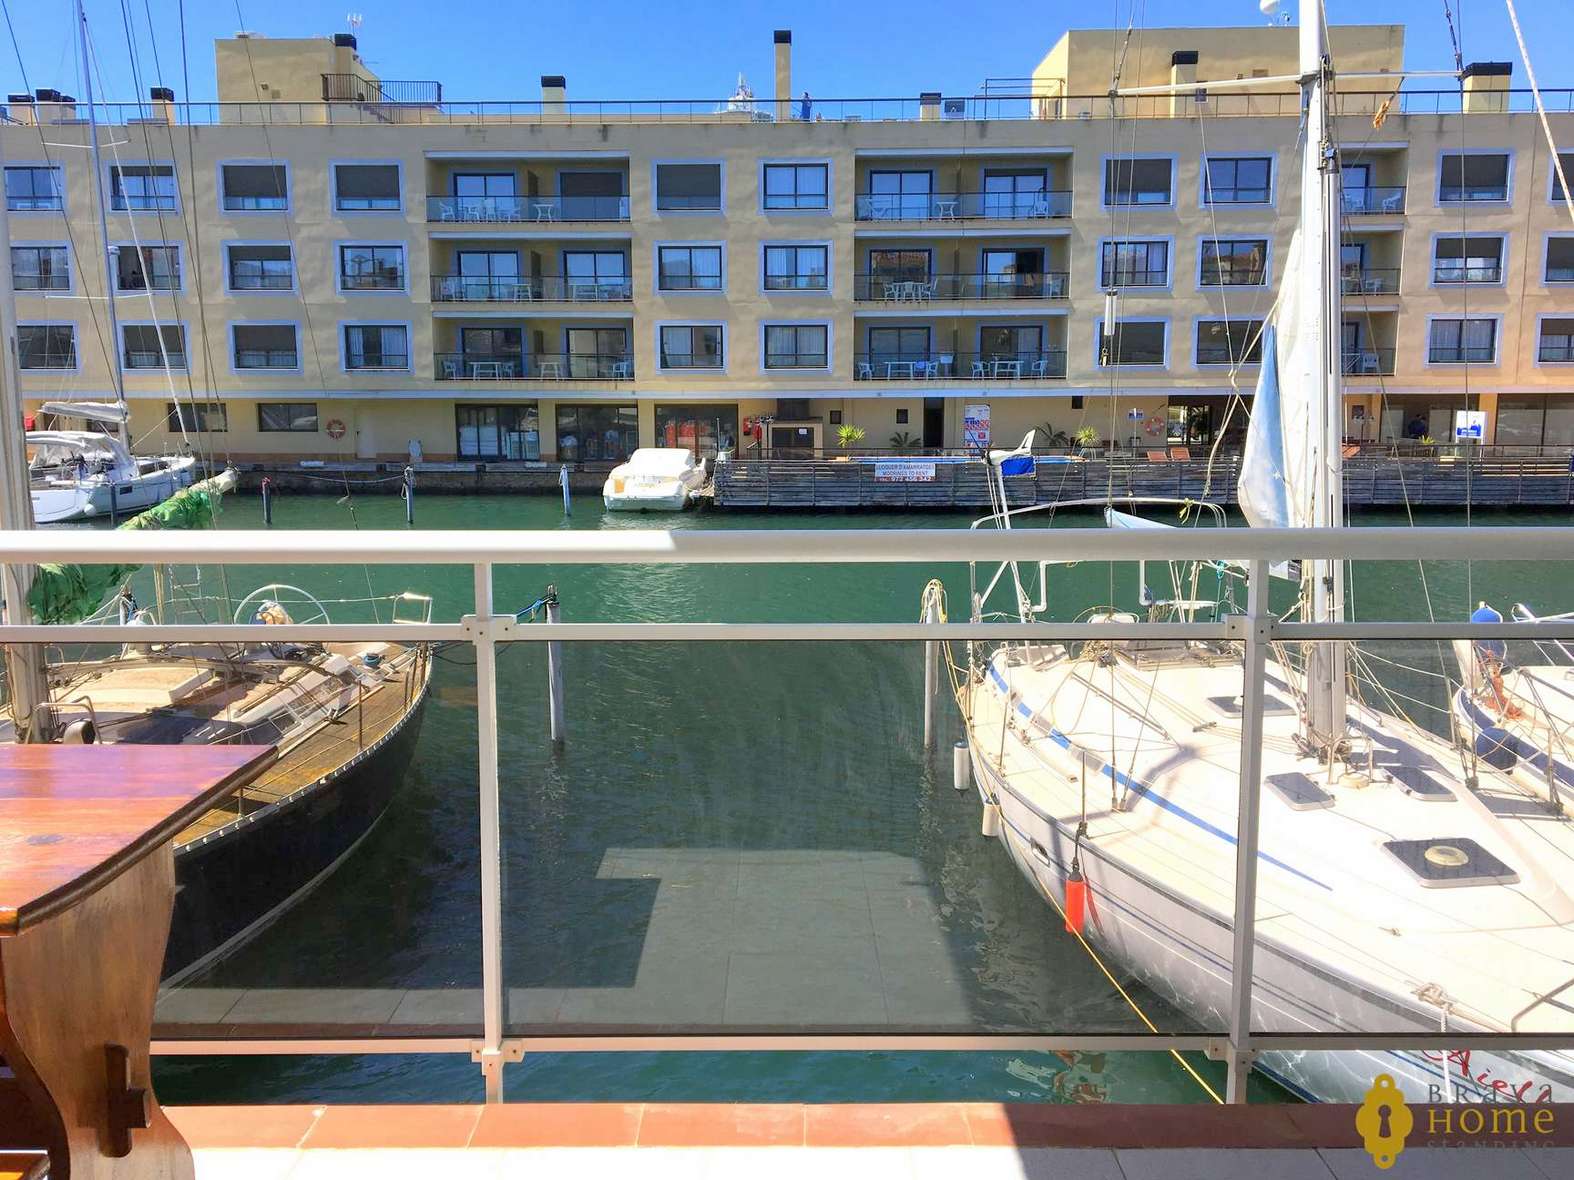 Beautiful apartment overlooking the canal, for sale in Empuriabrava